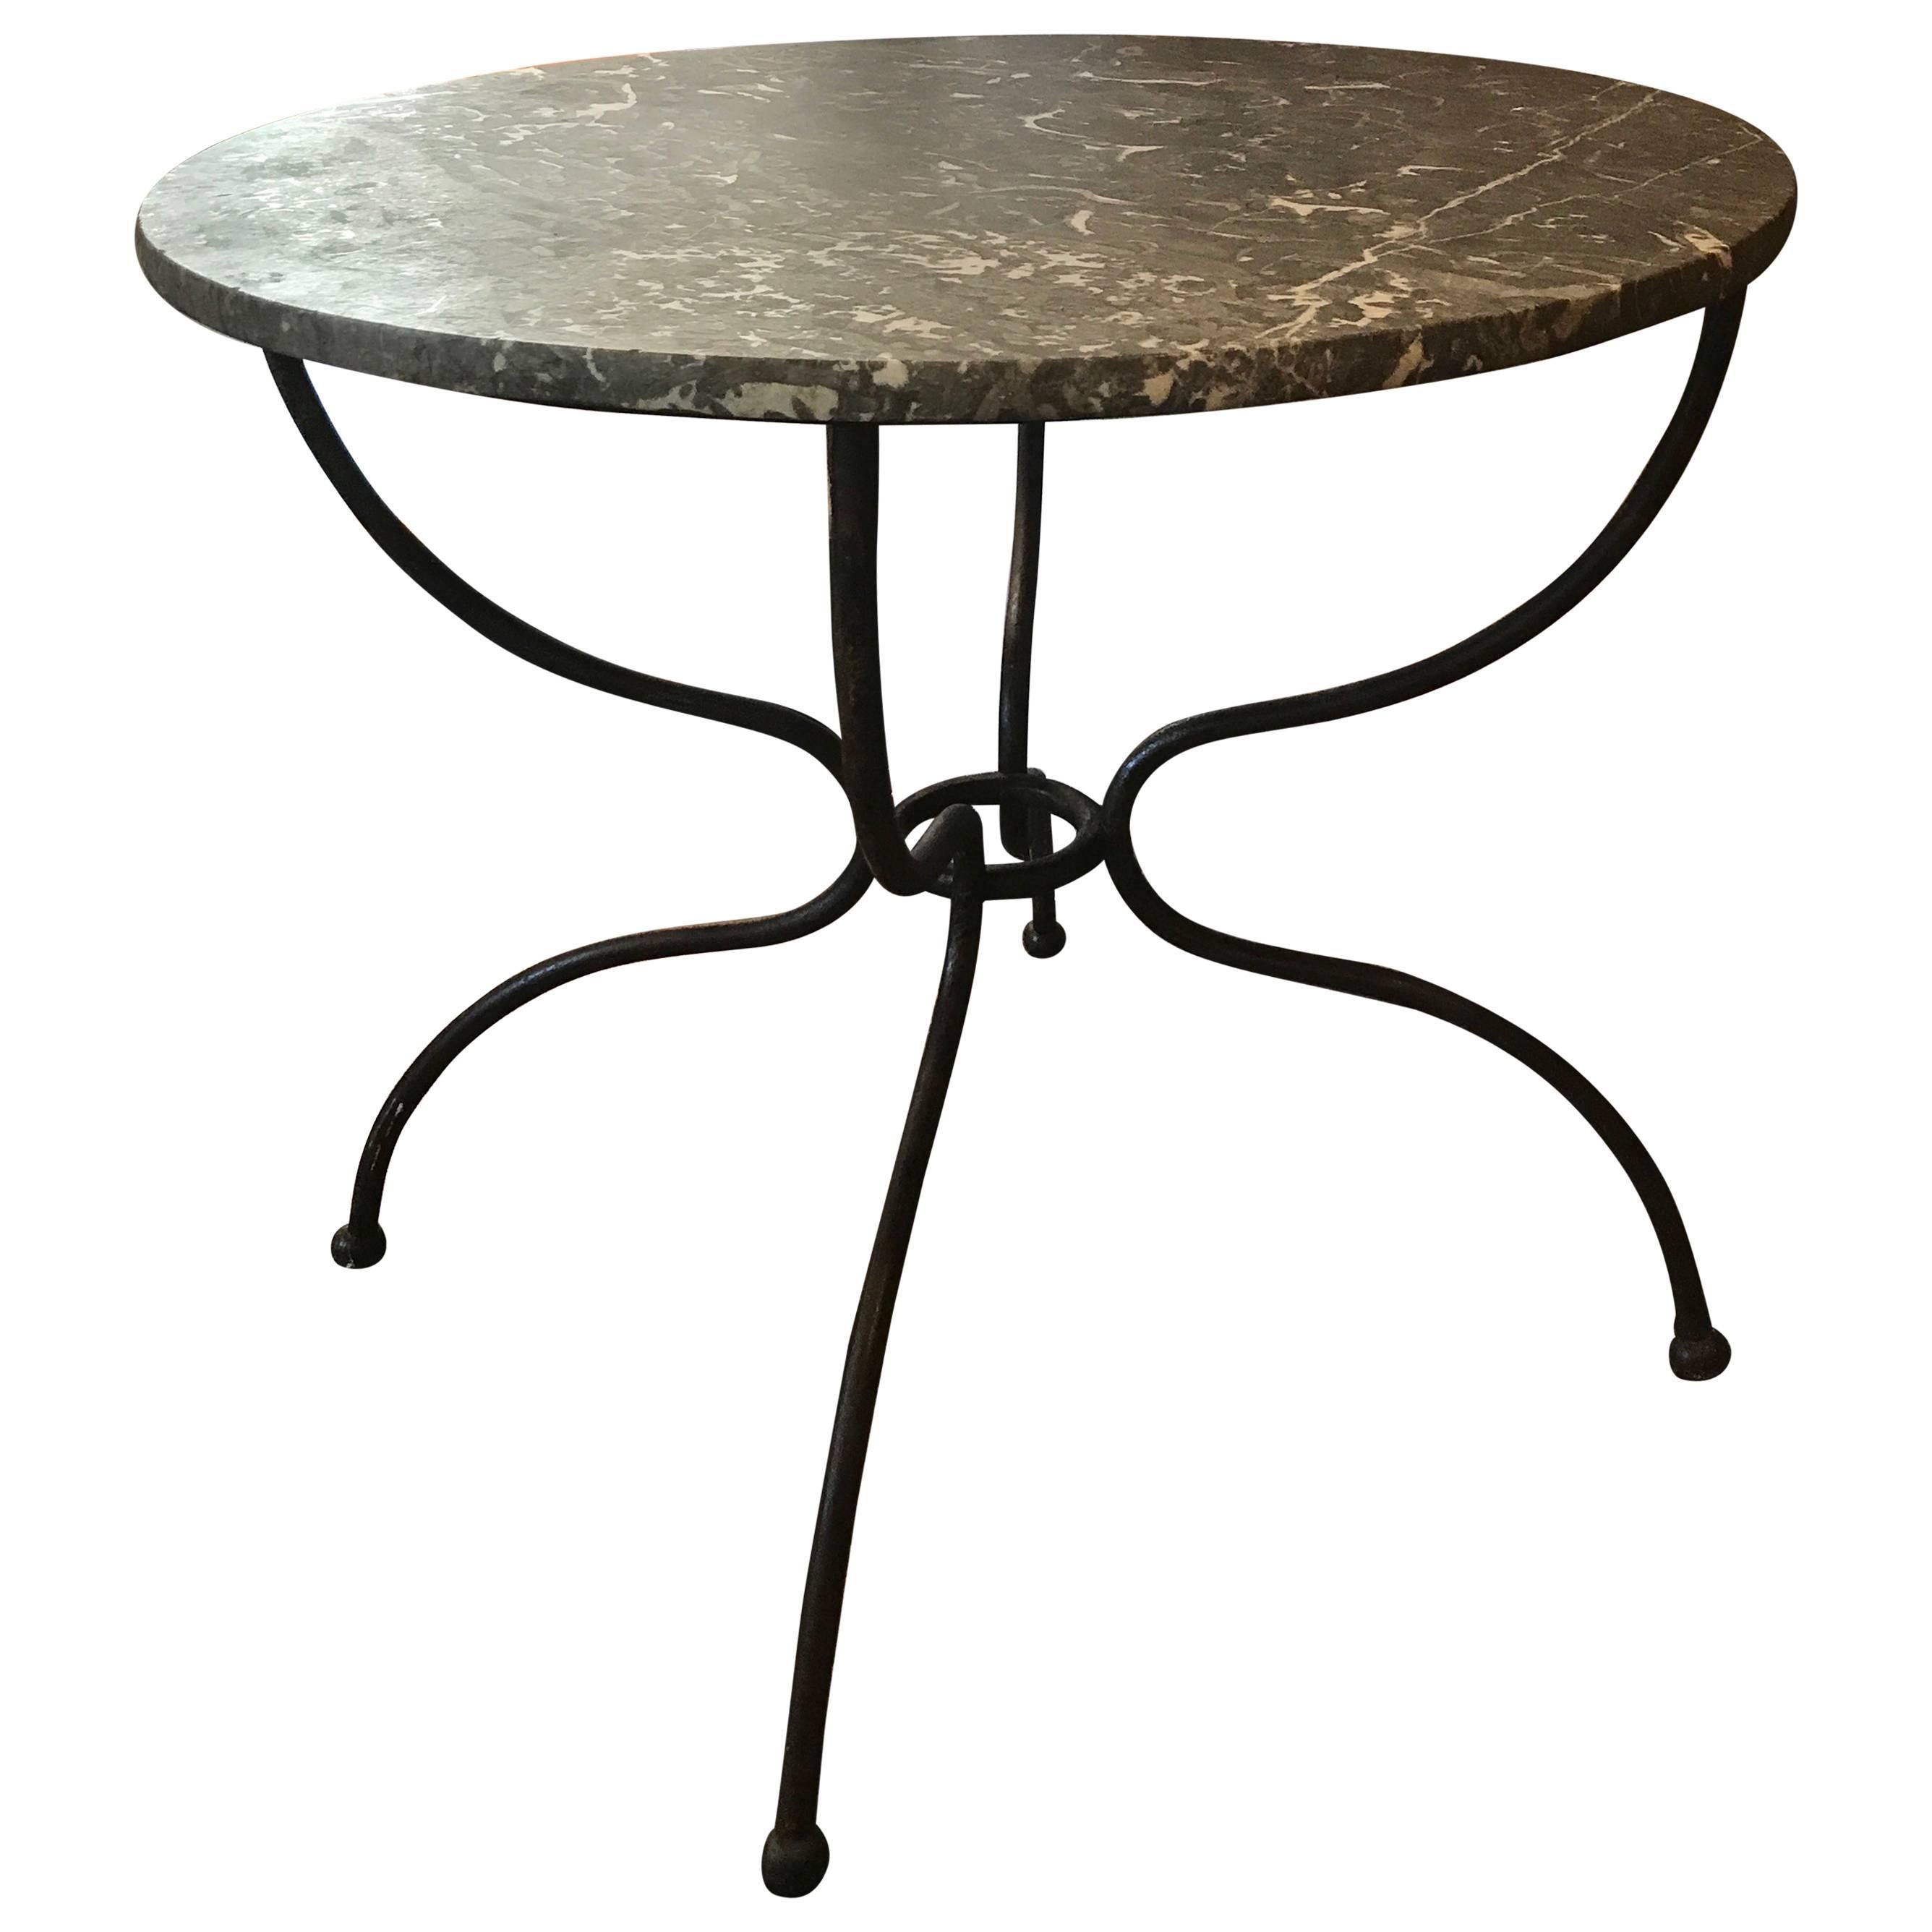 Early 20th Century Iron Bistro Table with Marble Top